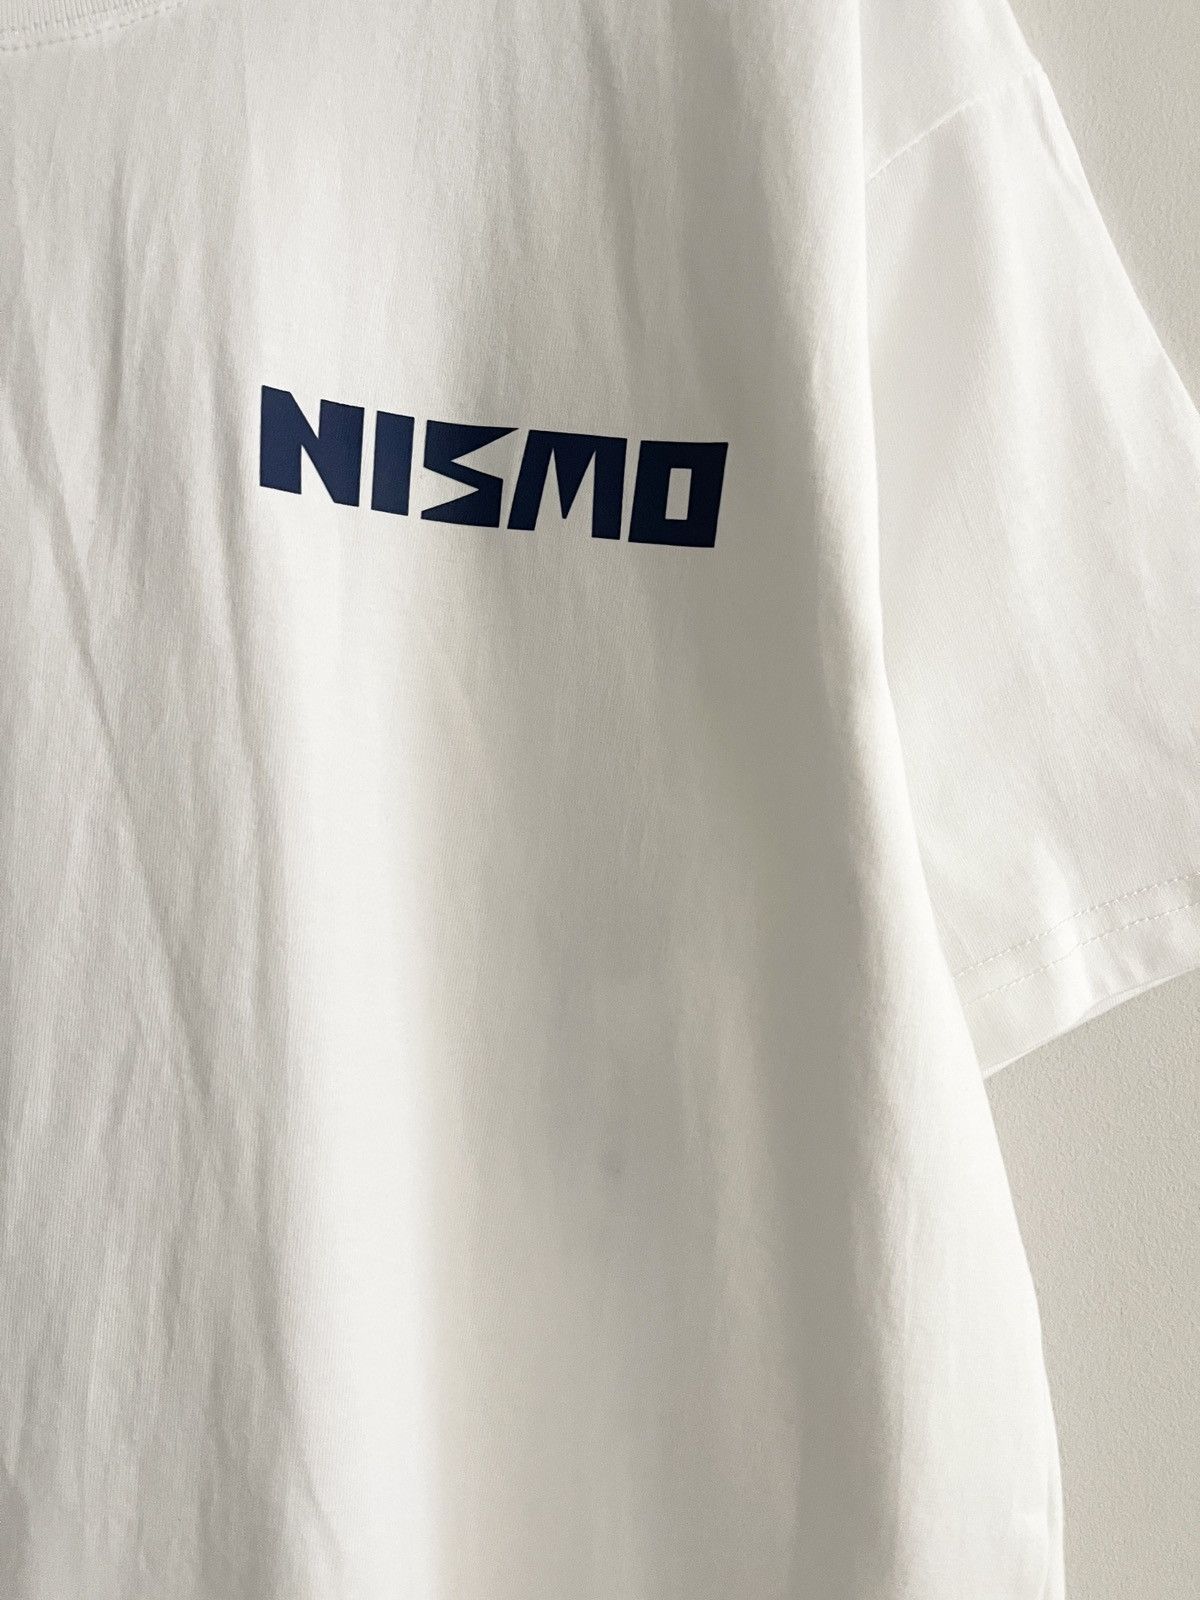 Vintage - STEAL! 2000s Japan NISMO CLARION GT-R LM '95 Tee (L) - 4